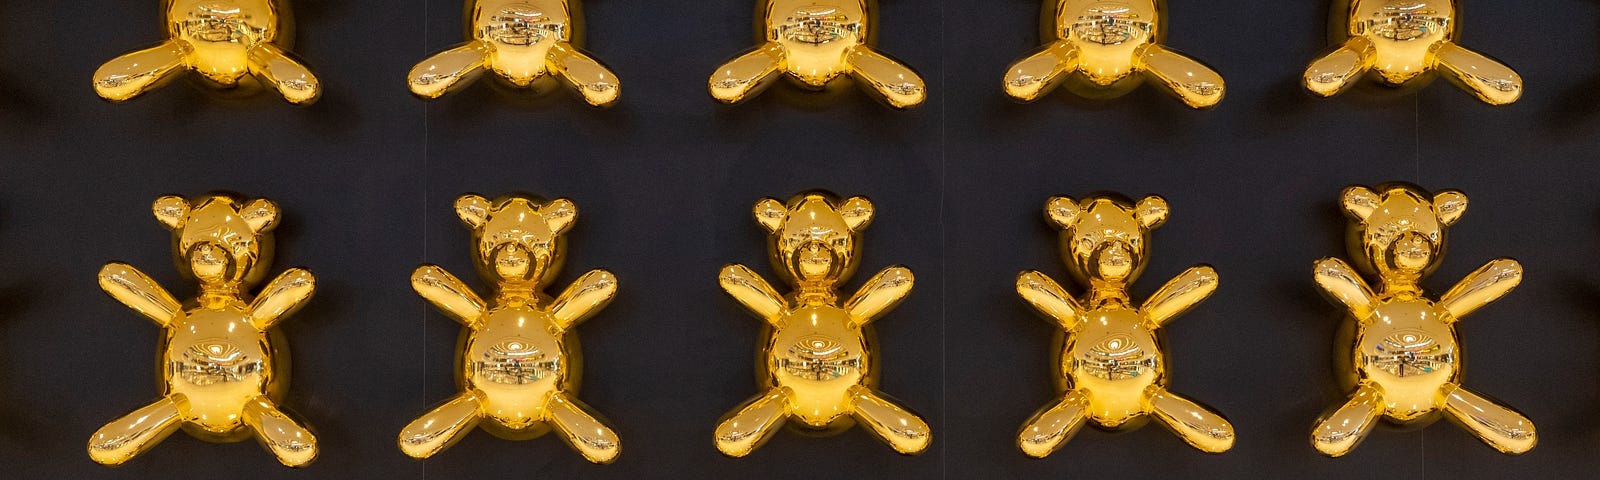 three rows of five golden bears